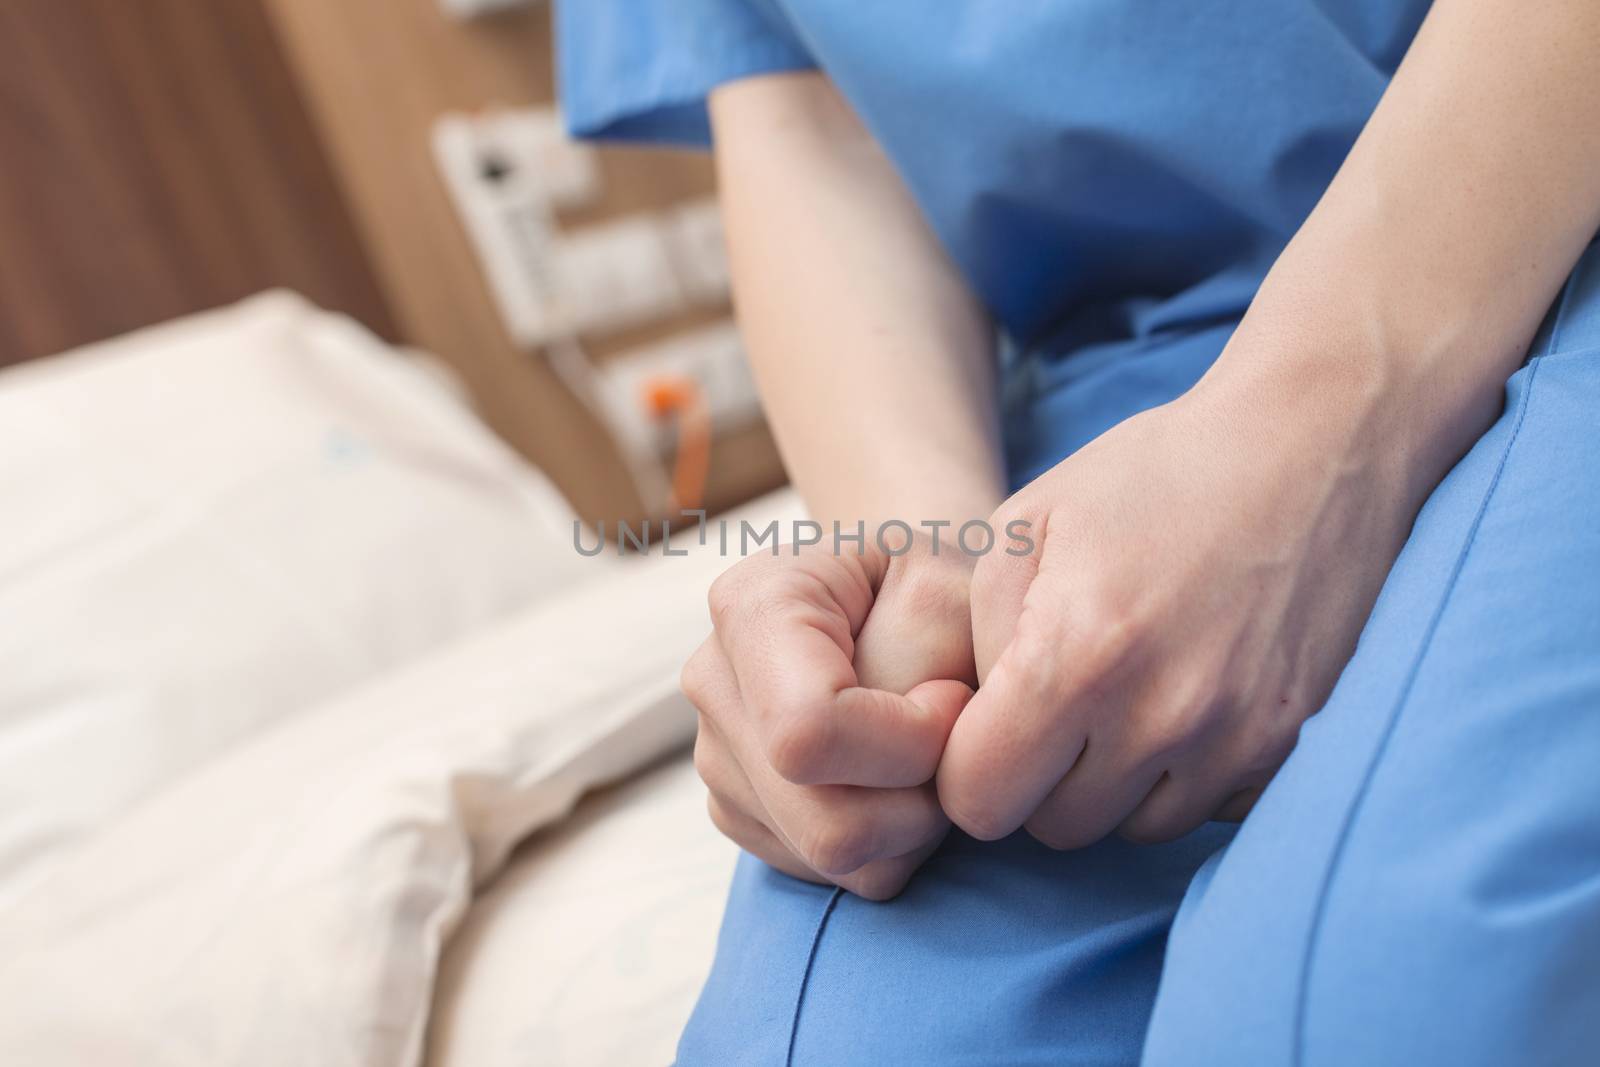 A patient's hands squeezing thumbs with hope in a modern hospital.